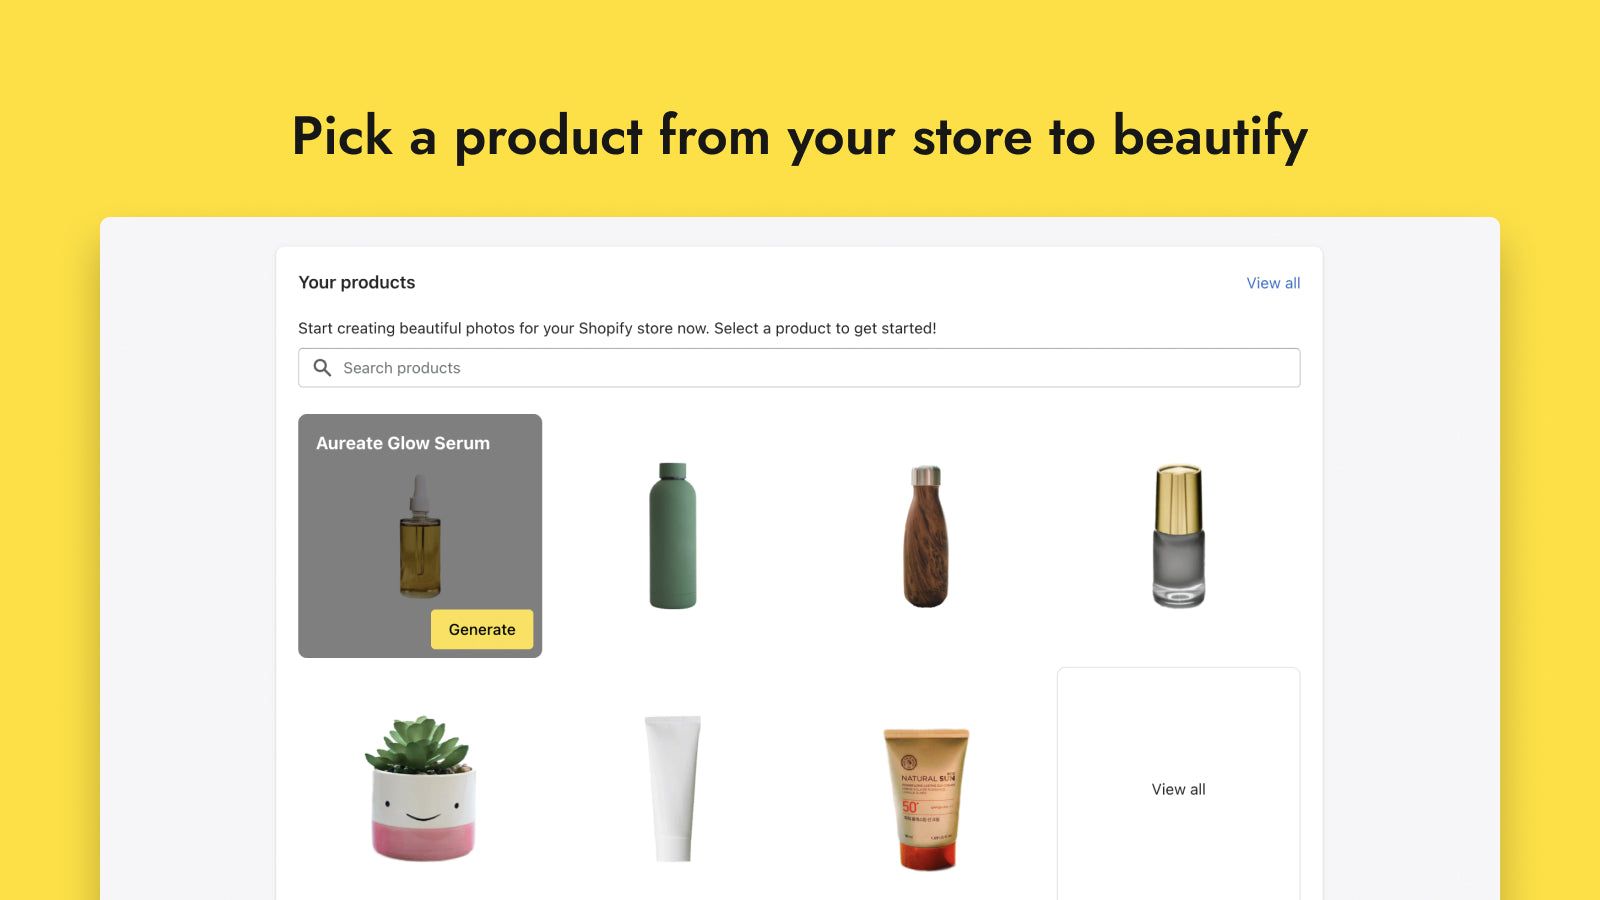 Start by picking a product from your store